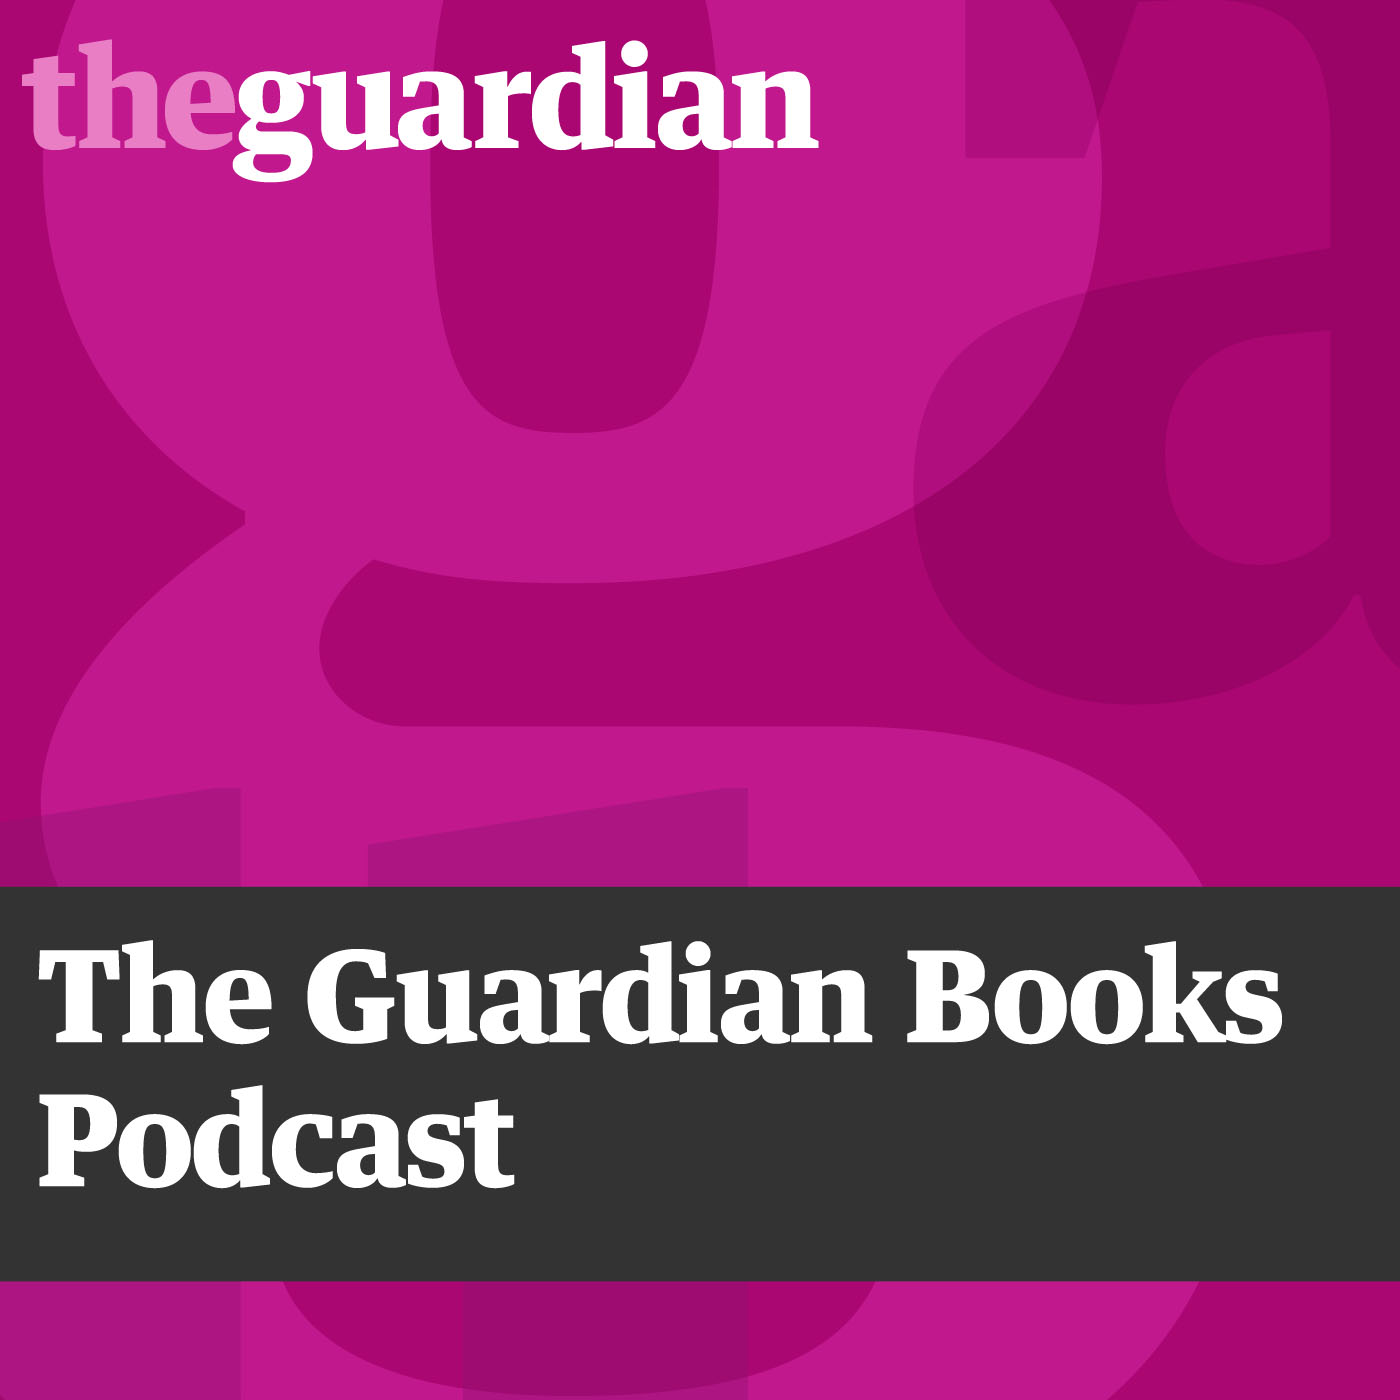 The Guardian Books Podcast (podcast)